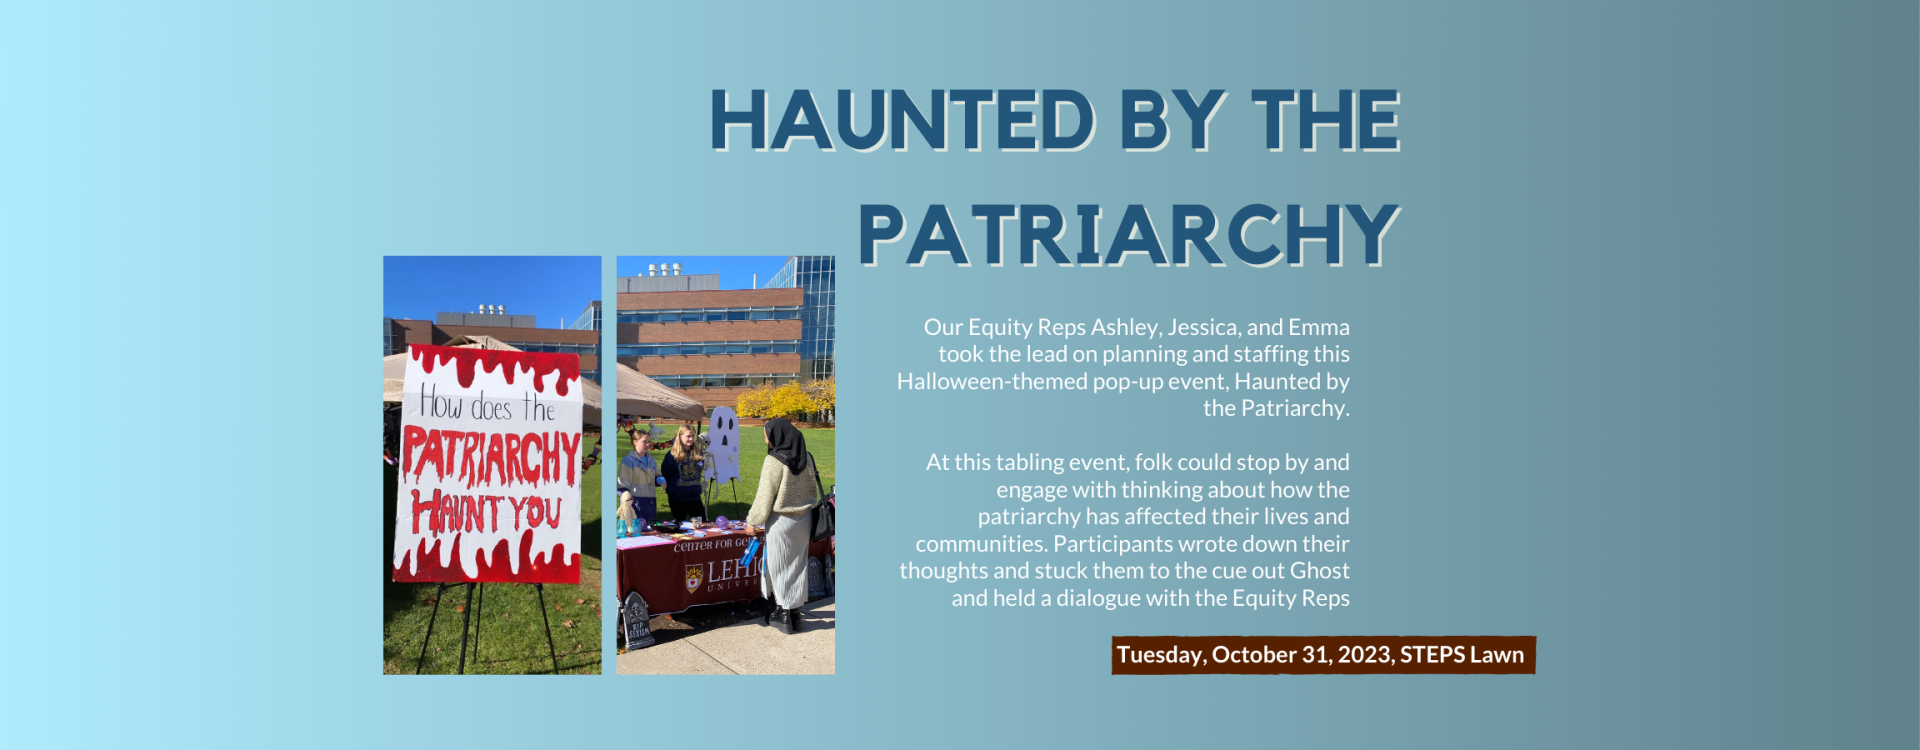 Haunted by the Patriarchy: Our Equity Reps Ashley, Jessica, and Emma took the lead on planning and staffing this Halloween-themed pop-up event, Haunted by the Patriarchy.   At this tabling event, folk could stop by and engage with thinking about how the patriarchy has affected their lives and communities. Participants wrote down their thoughts and stuck them to the cue out Ghost and held a dialogue with the Equity Reps